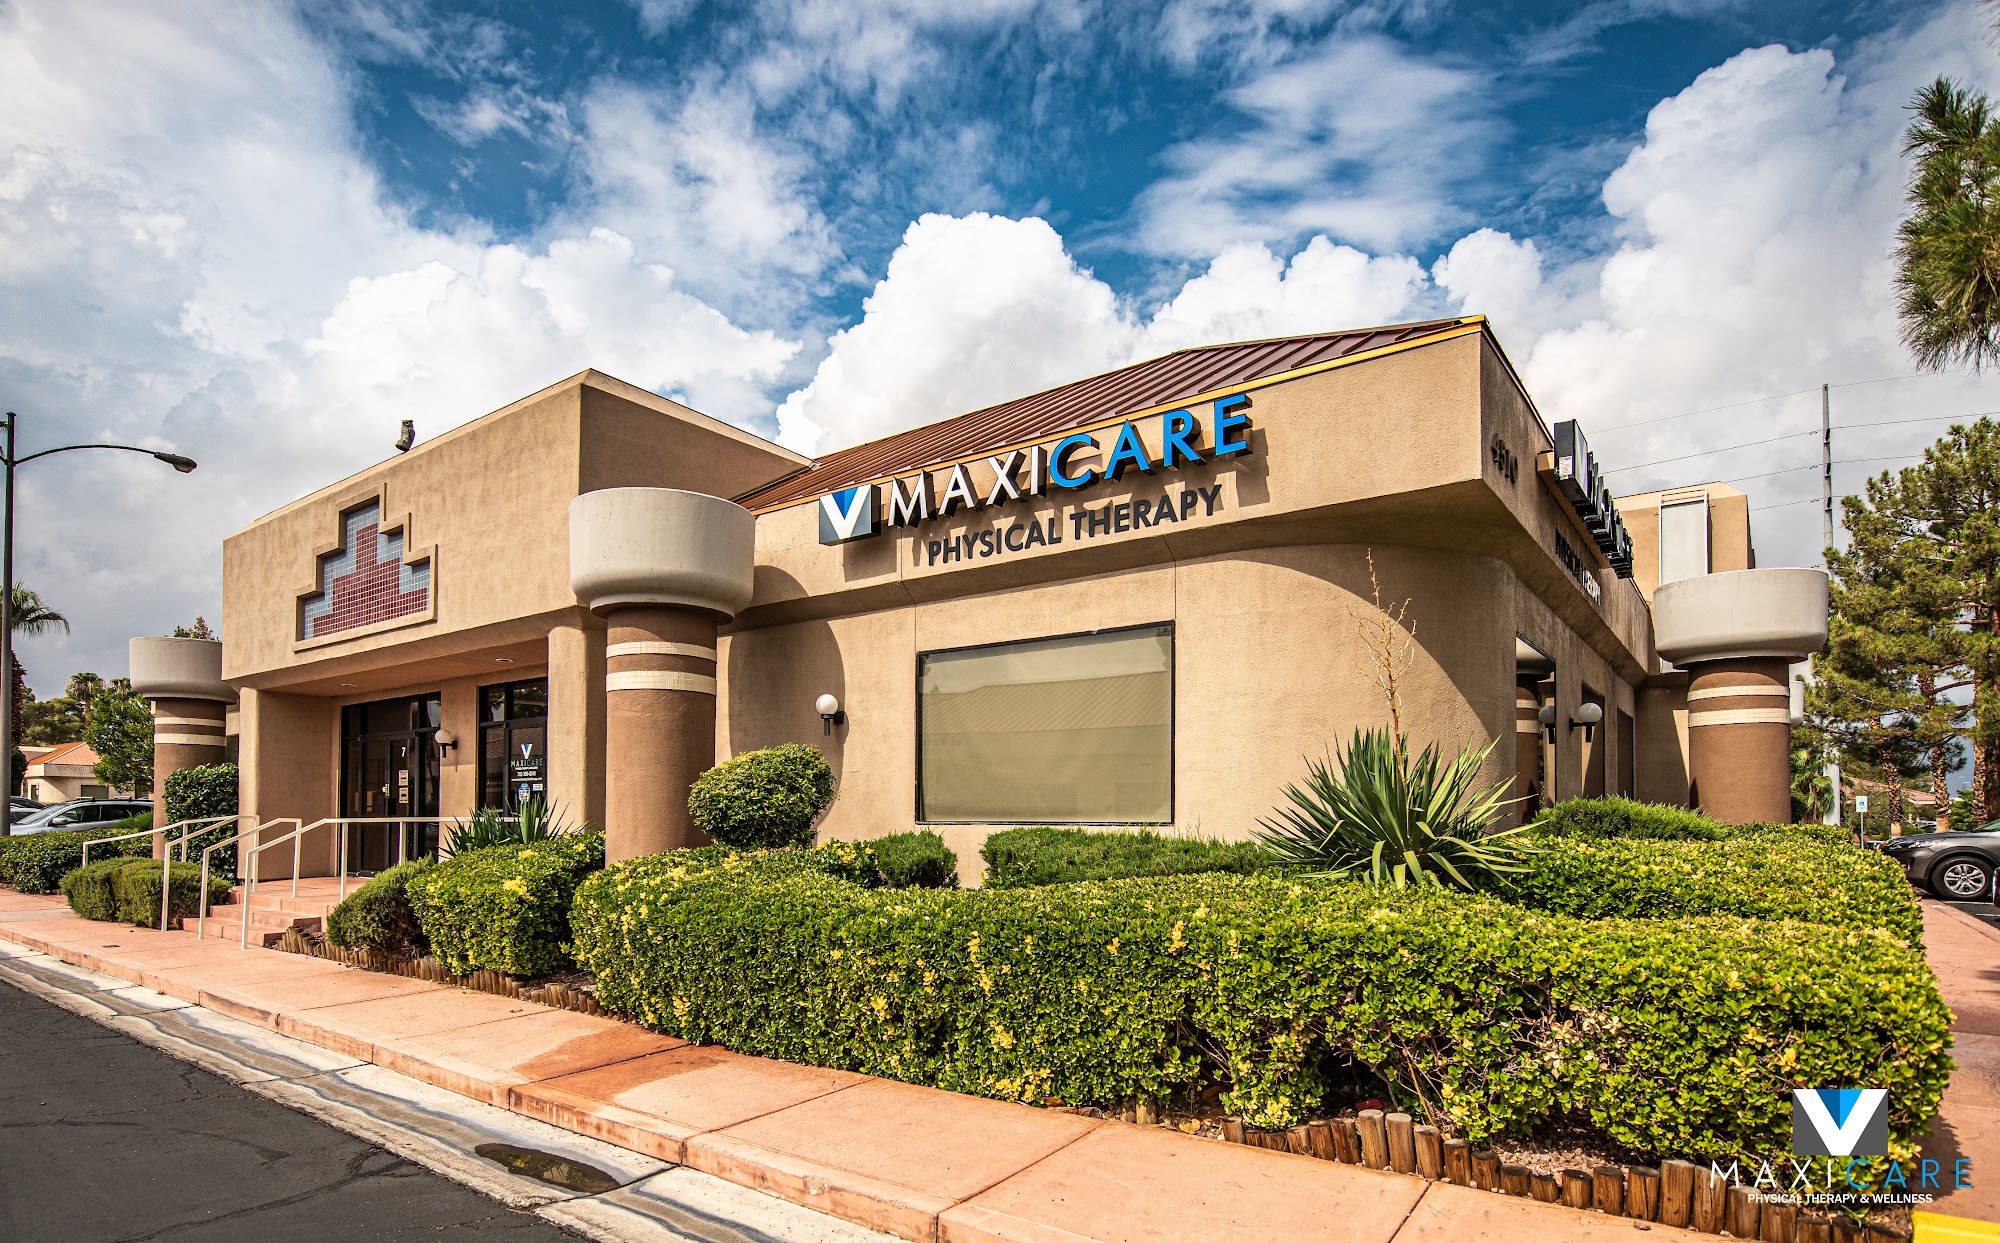 Maxicare Physical Therapy & Wellness of Las Vegas